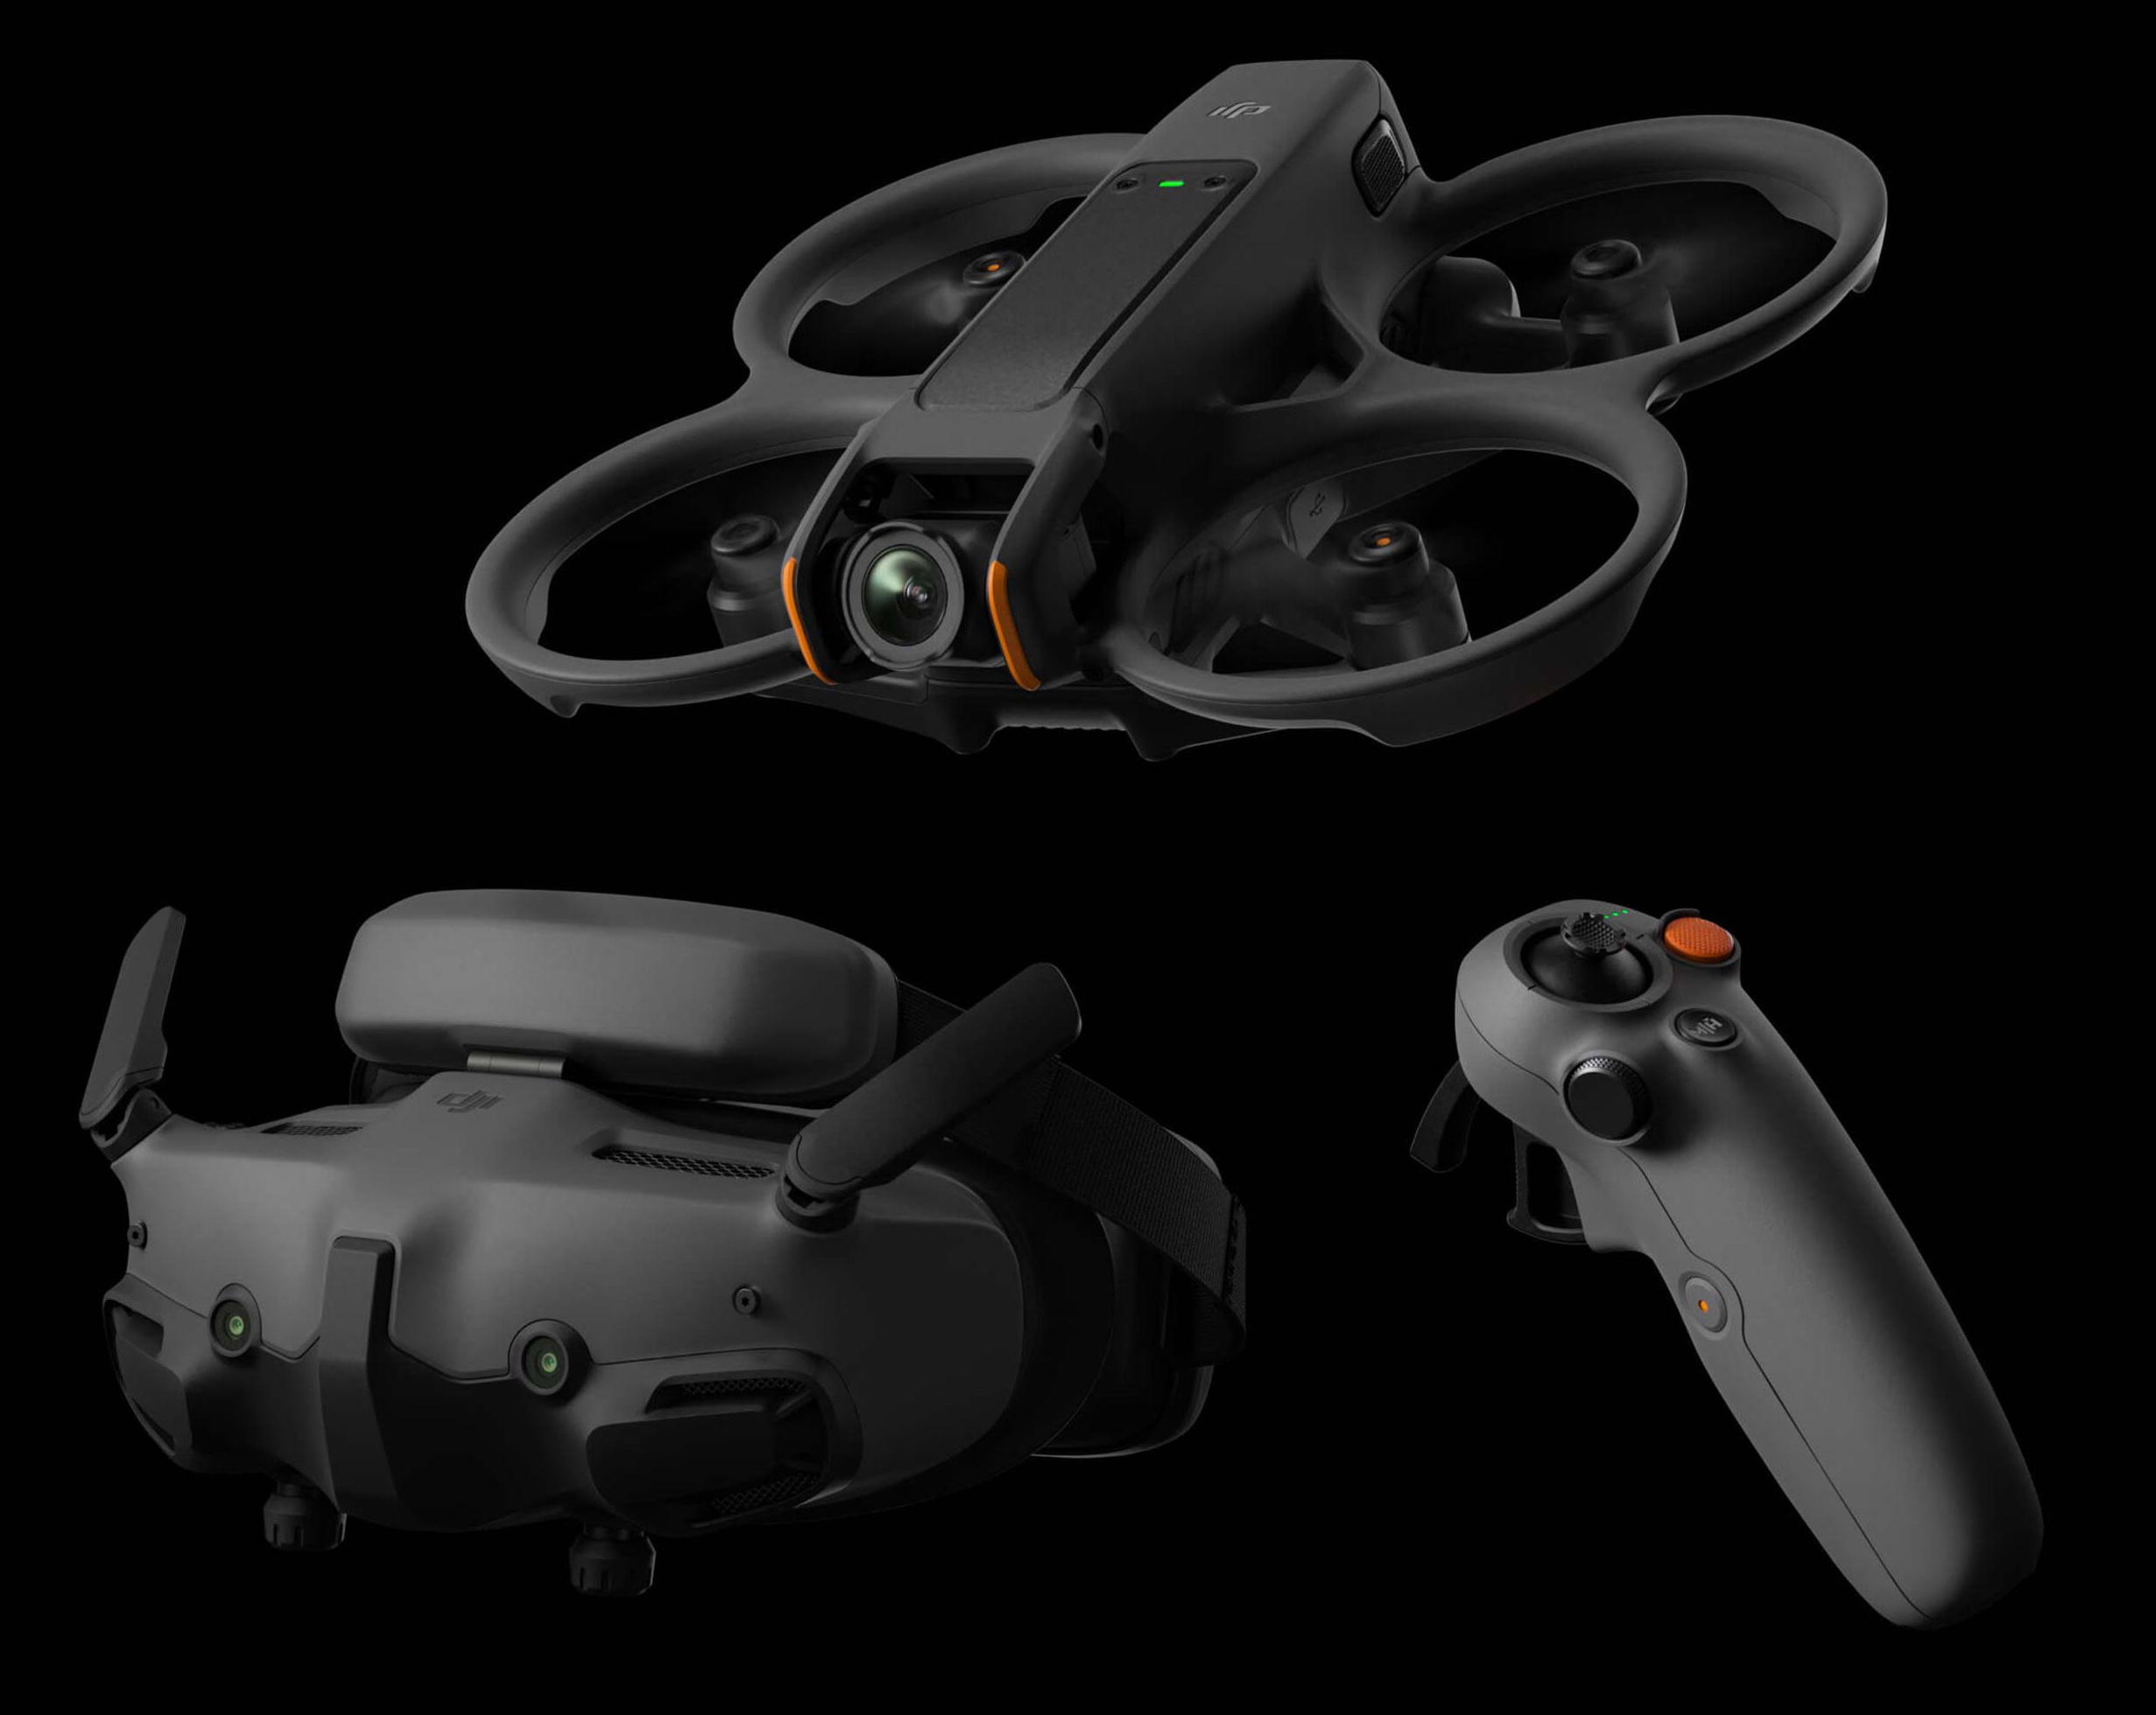 Avata's one handed controller, DJI Goggles 3 and the Avata 2